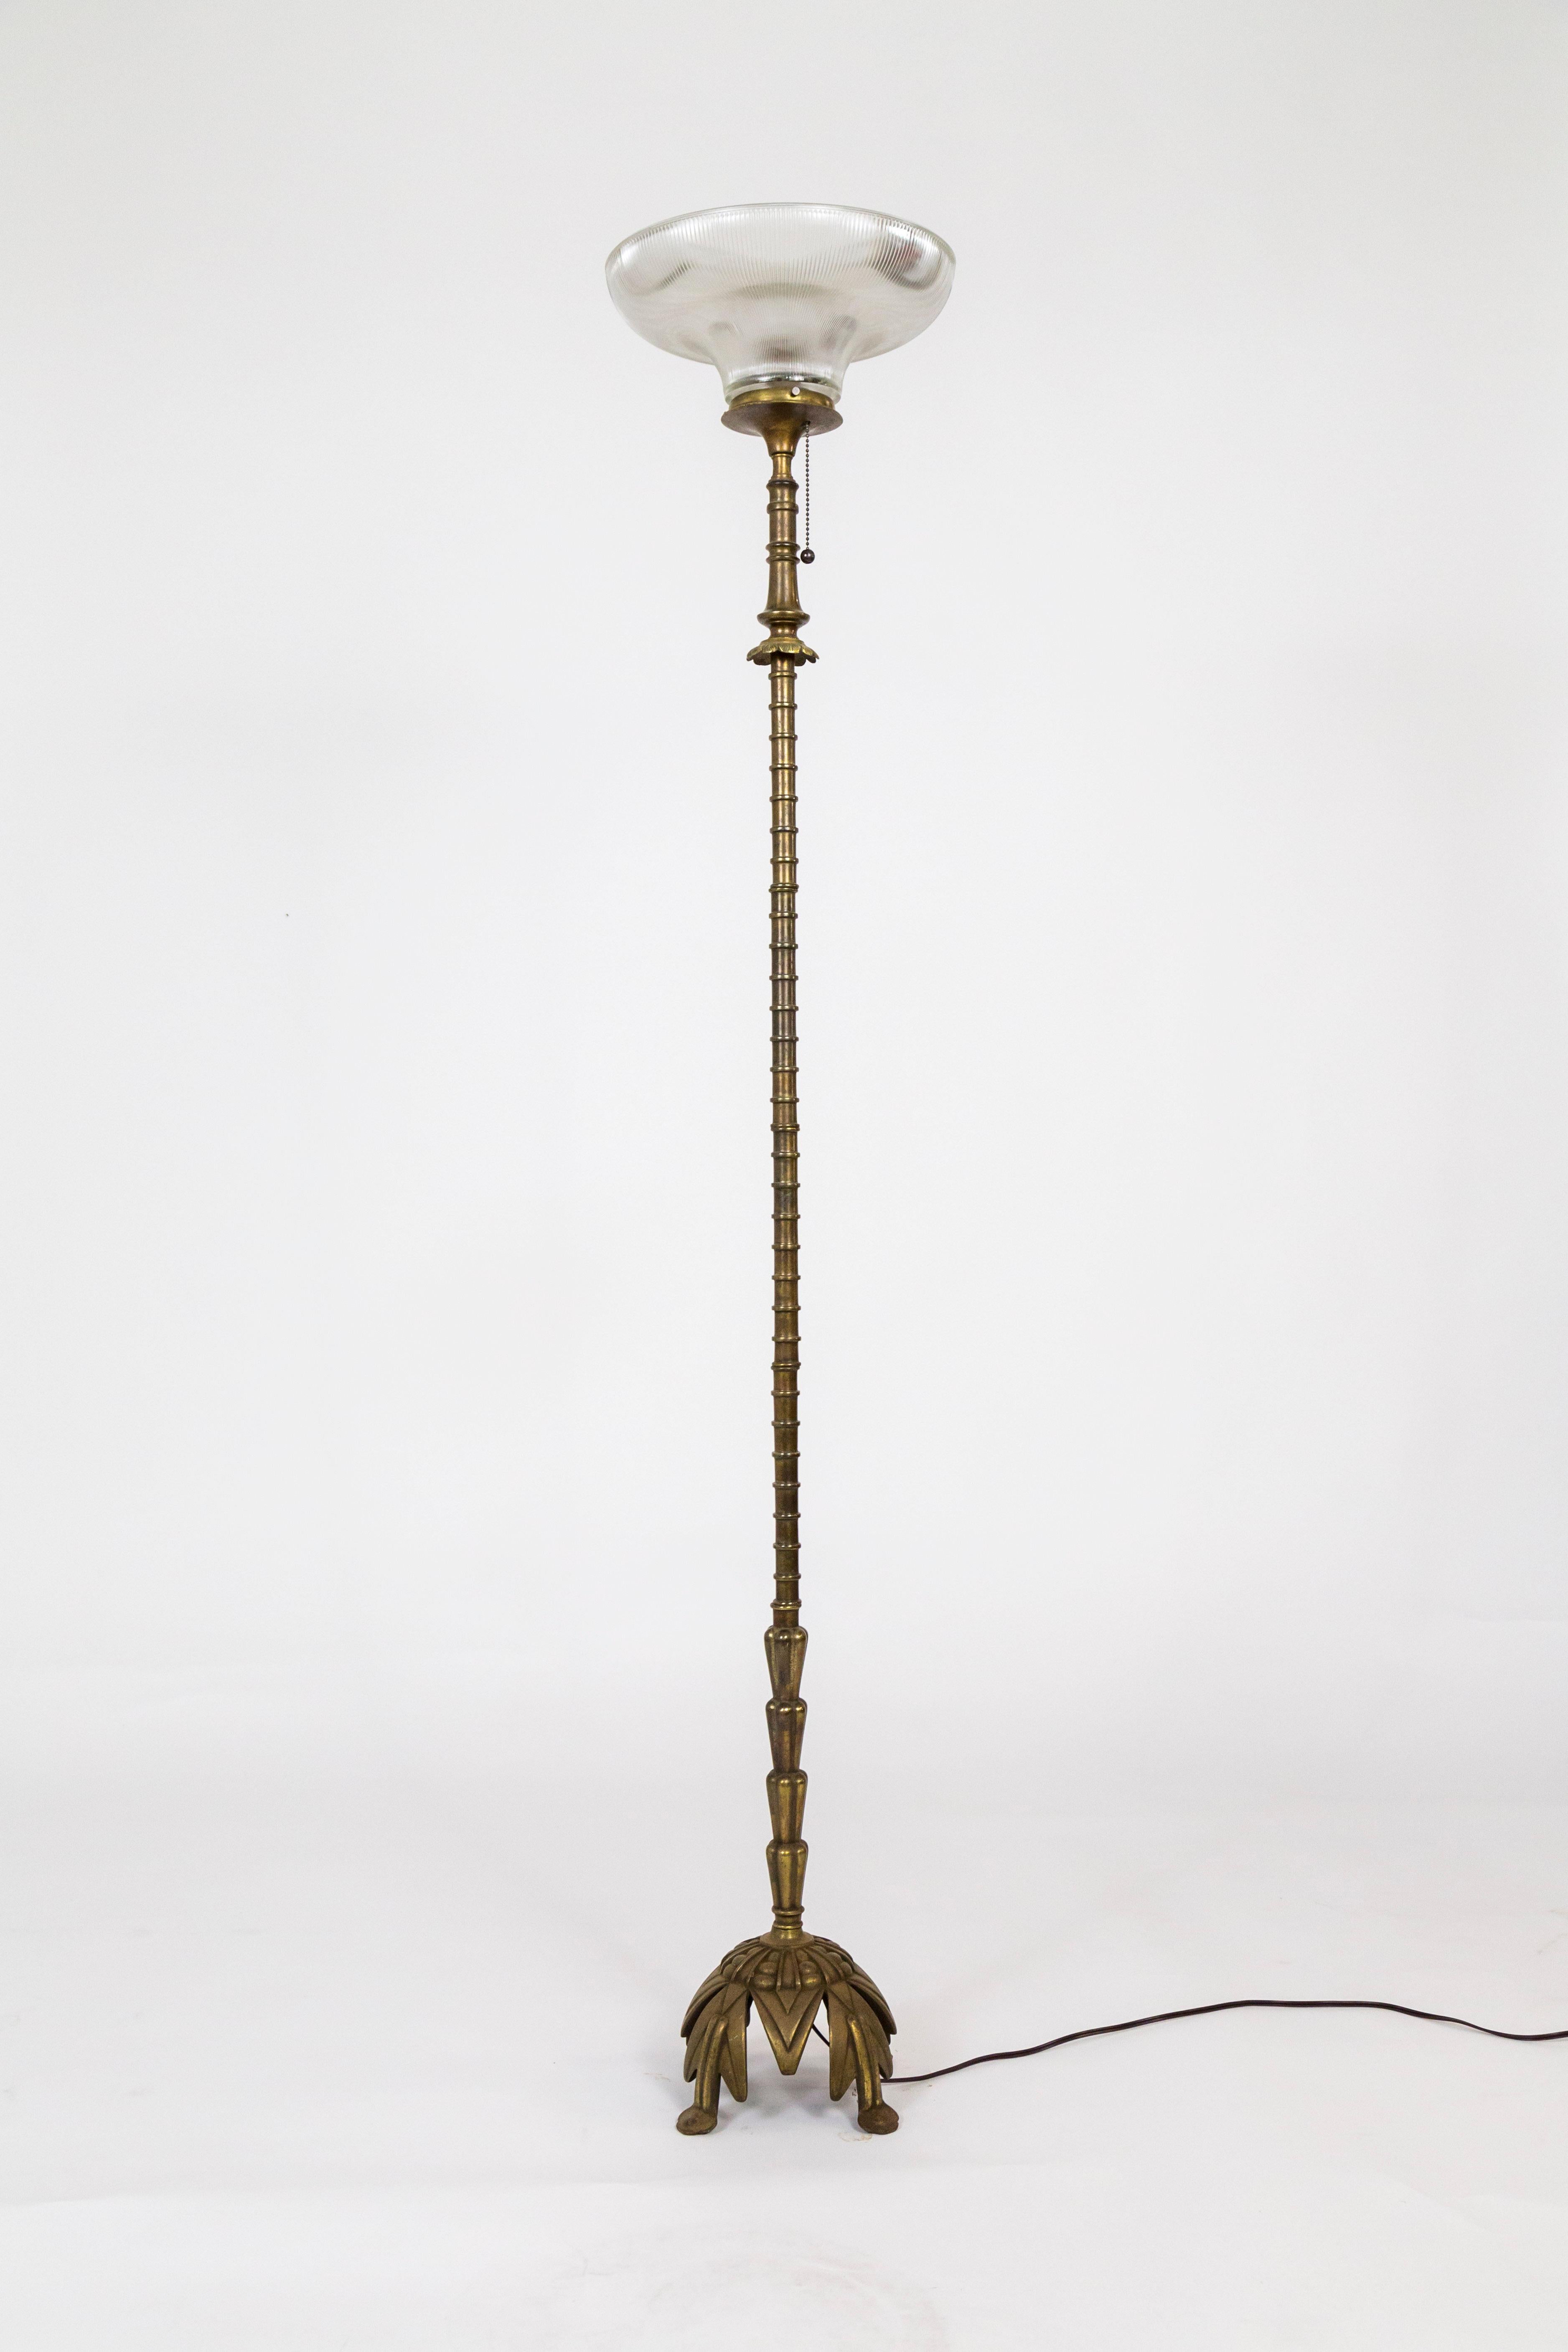 A bronze floor lamp with well crafted Deco designs: a very cool elevated base, ribbed stem, and flower accent by the pull chain; an uplight with a Holophane glass shade. By Rembrandt Lamp Company, signed inside of base: “PAT APP FOR Rembrandt 7079.”